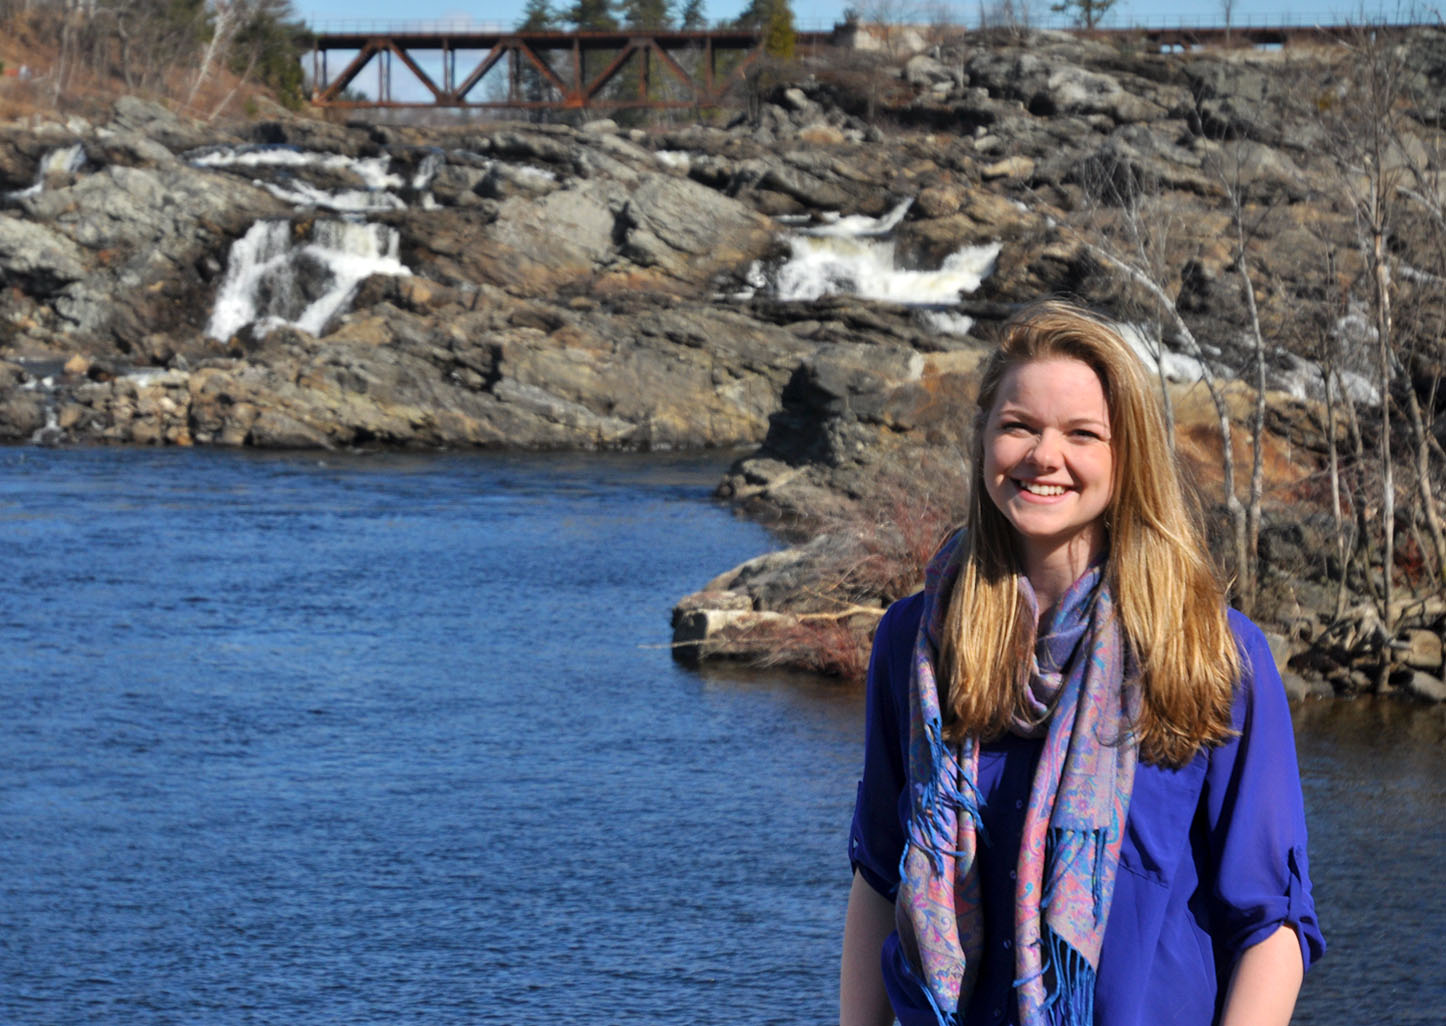 For her senior thesis in environmental studies, Taryn O’Connell ‘13 investigated a debate about Androscoggin River pollution that took place in Lewiston in the 1950s. Photograph by Hank Schless '13.